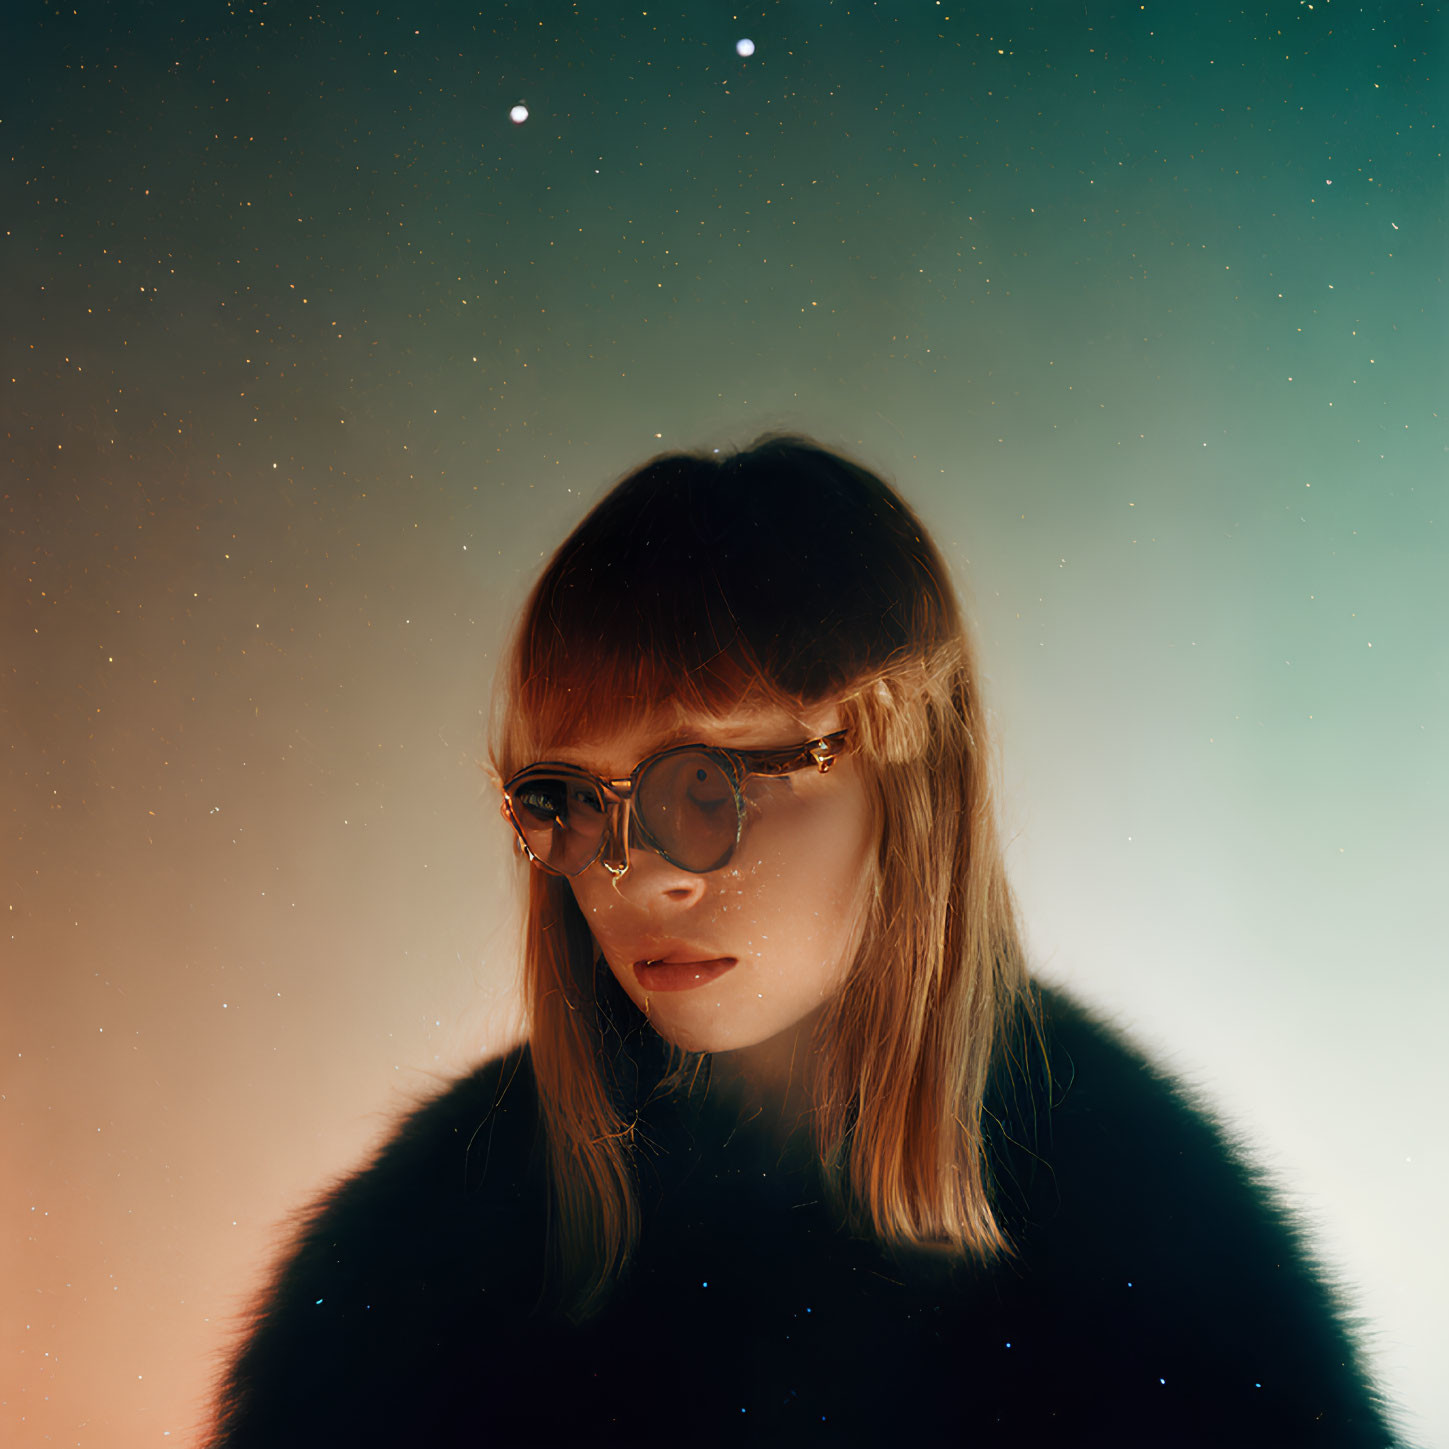 Woman with Bangs and Glasses in Ethereal Night Sky Setting